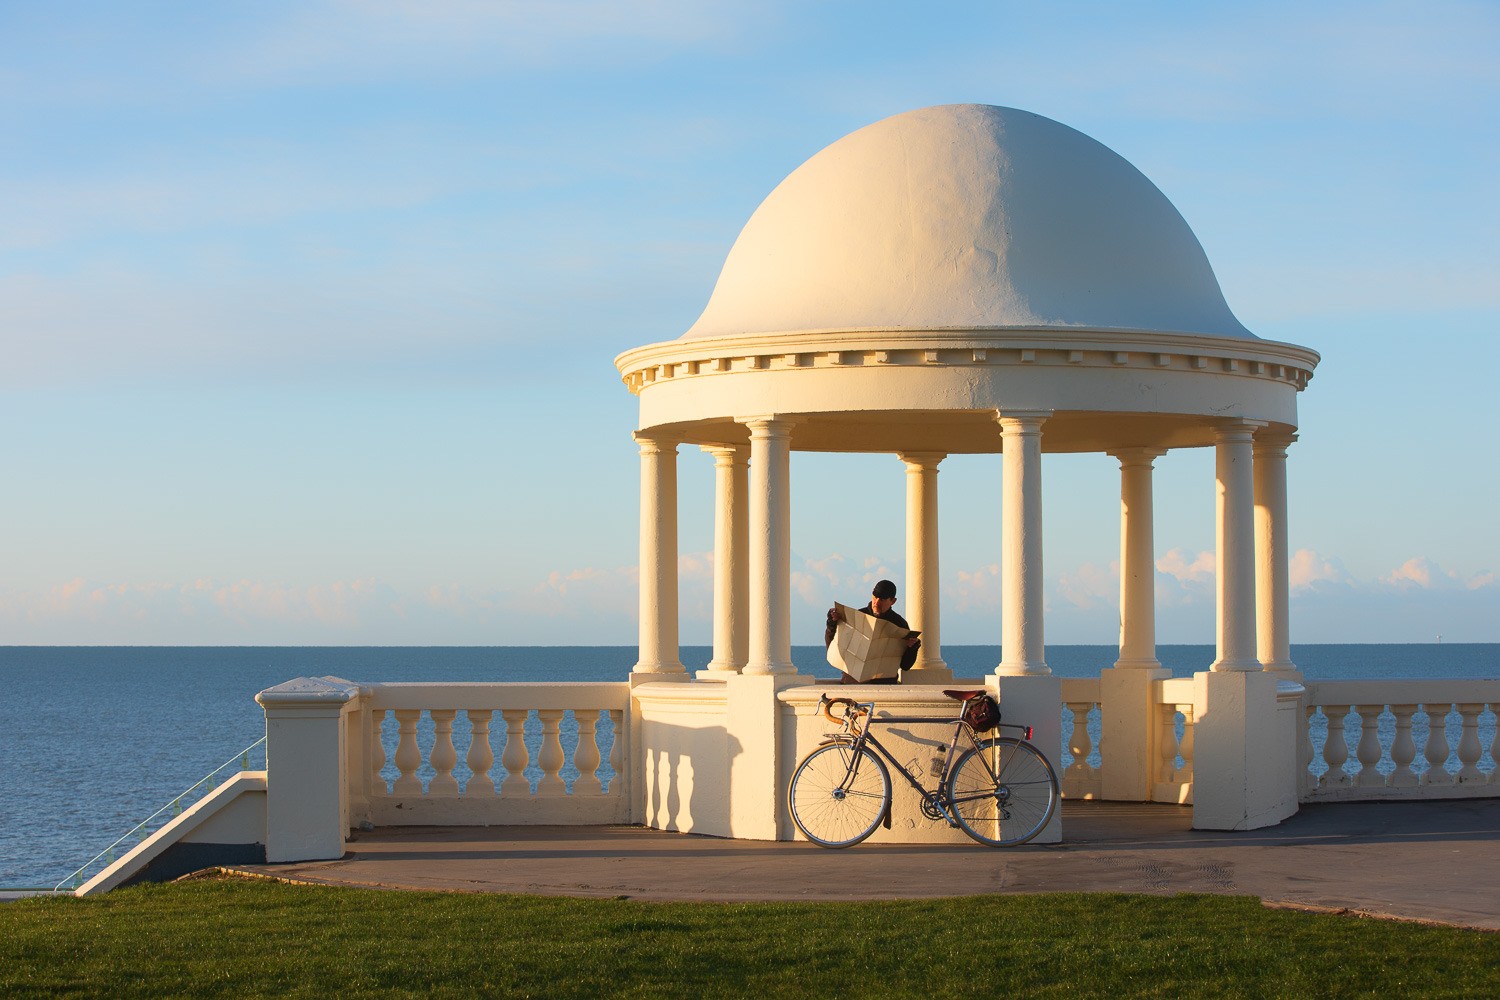 Mad with bicycle reading map by neo-classical dome by the seaside in bright